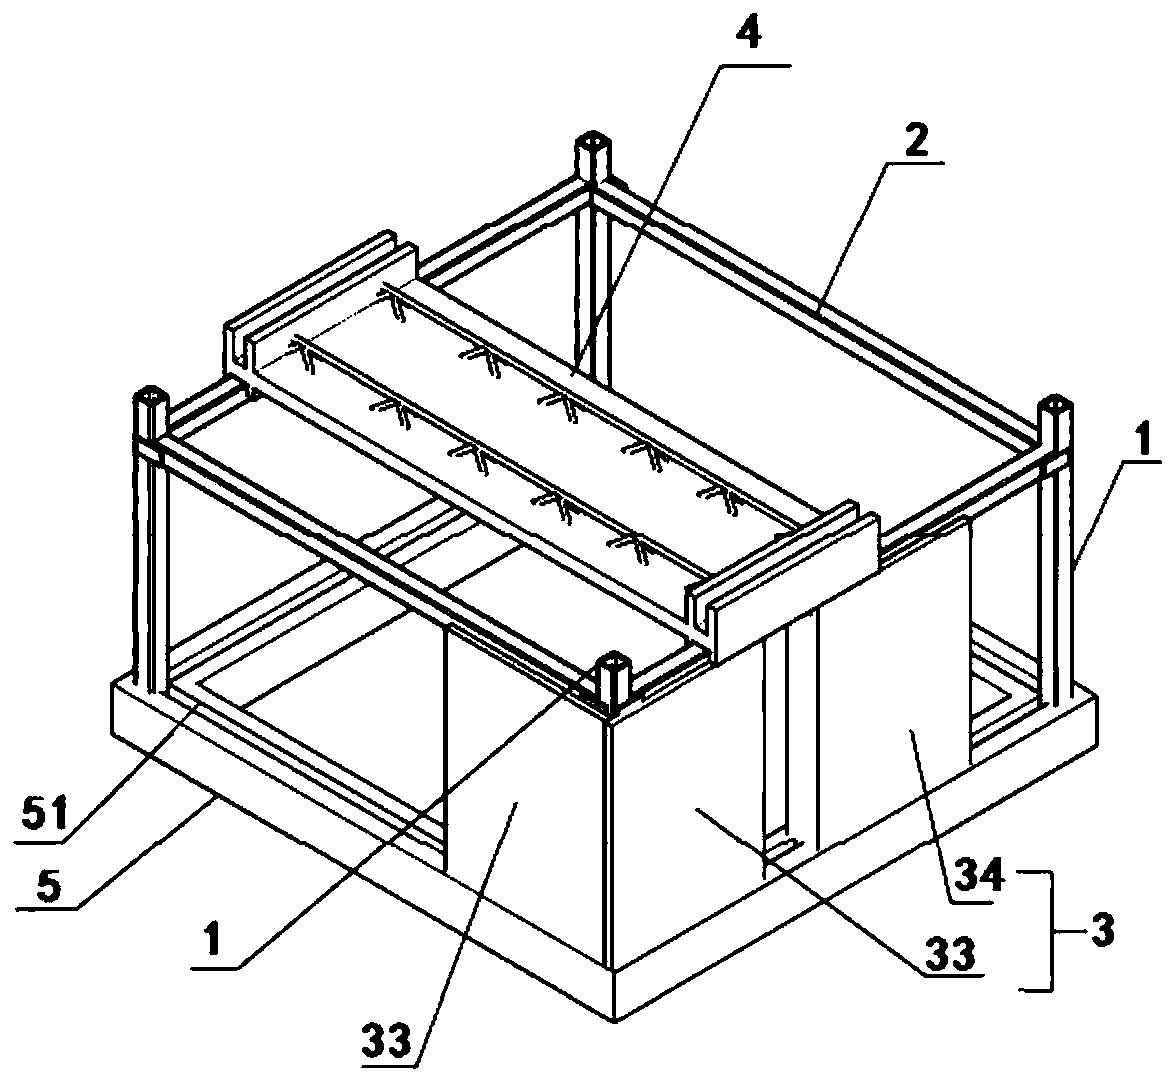 Construction Method of Prefabricated Steel Tube Concrete Frame-Shear Wall Structural System